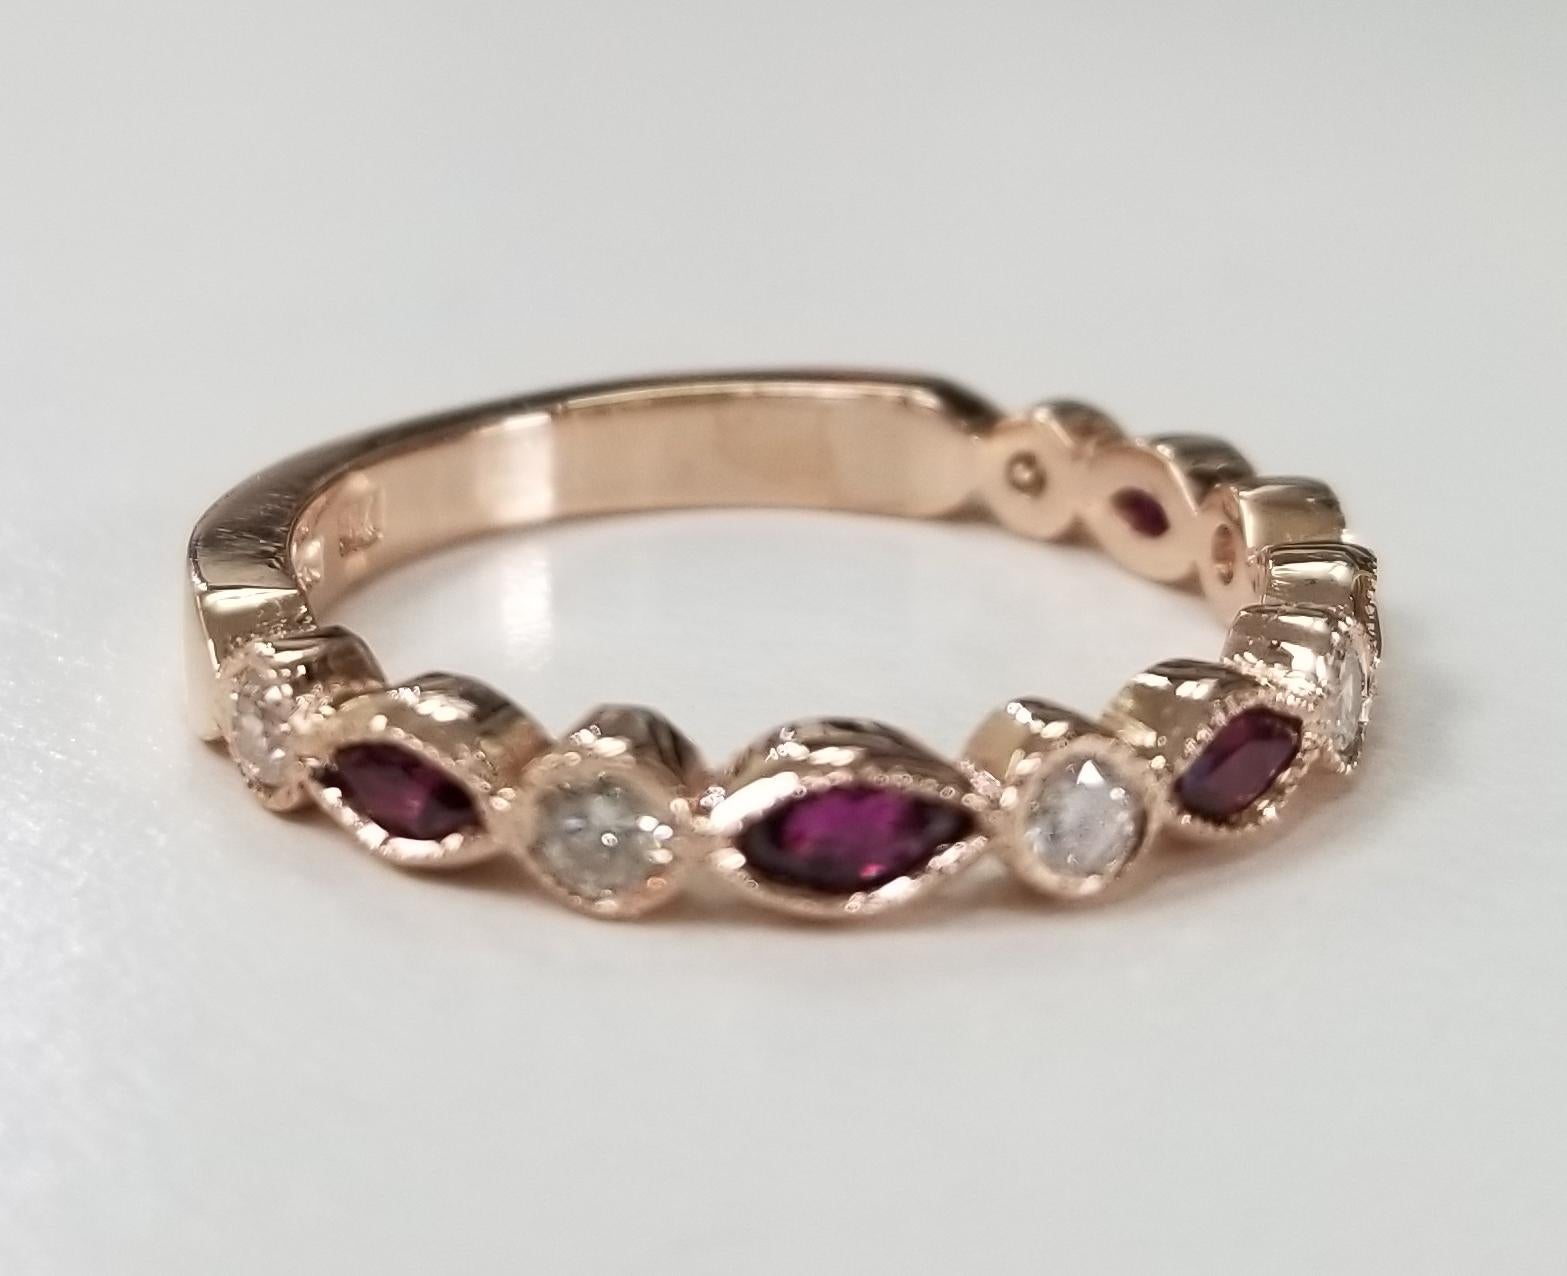 14 karat ruby and diamond ring, containing 5 marquise cut rubies weighing .45pts. and 6 round full cut diamonds weighing .30pts. bezel set with milgrain.  This ring is a size 8 but we will size to fit for free.